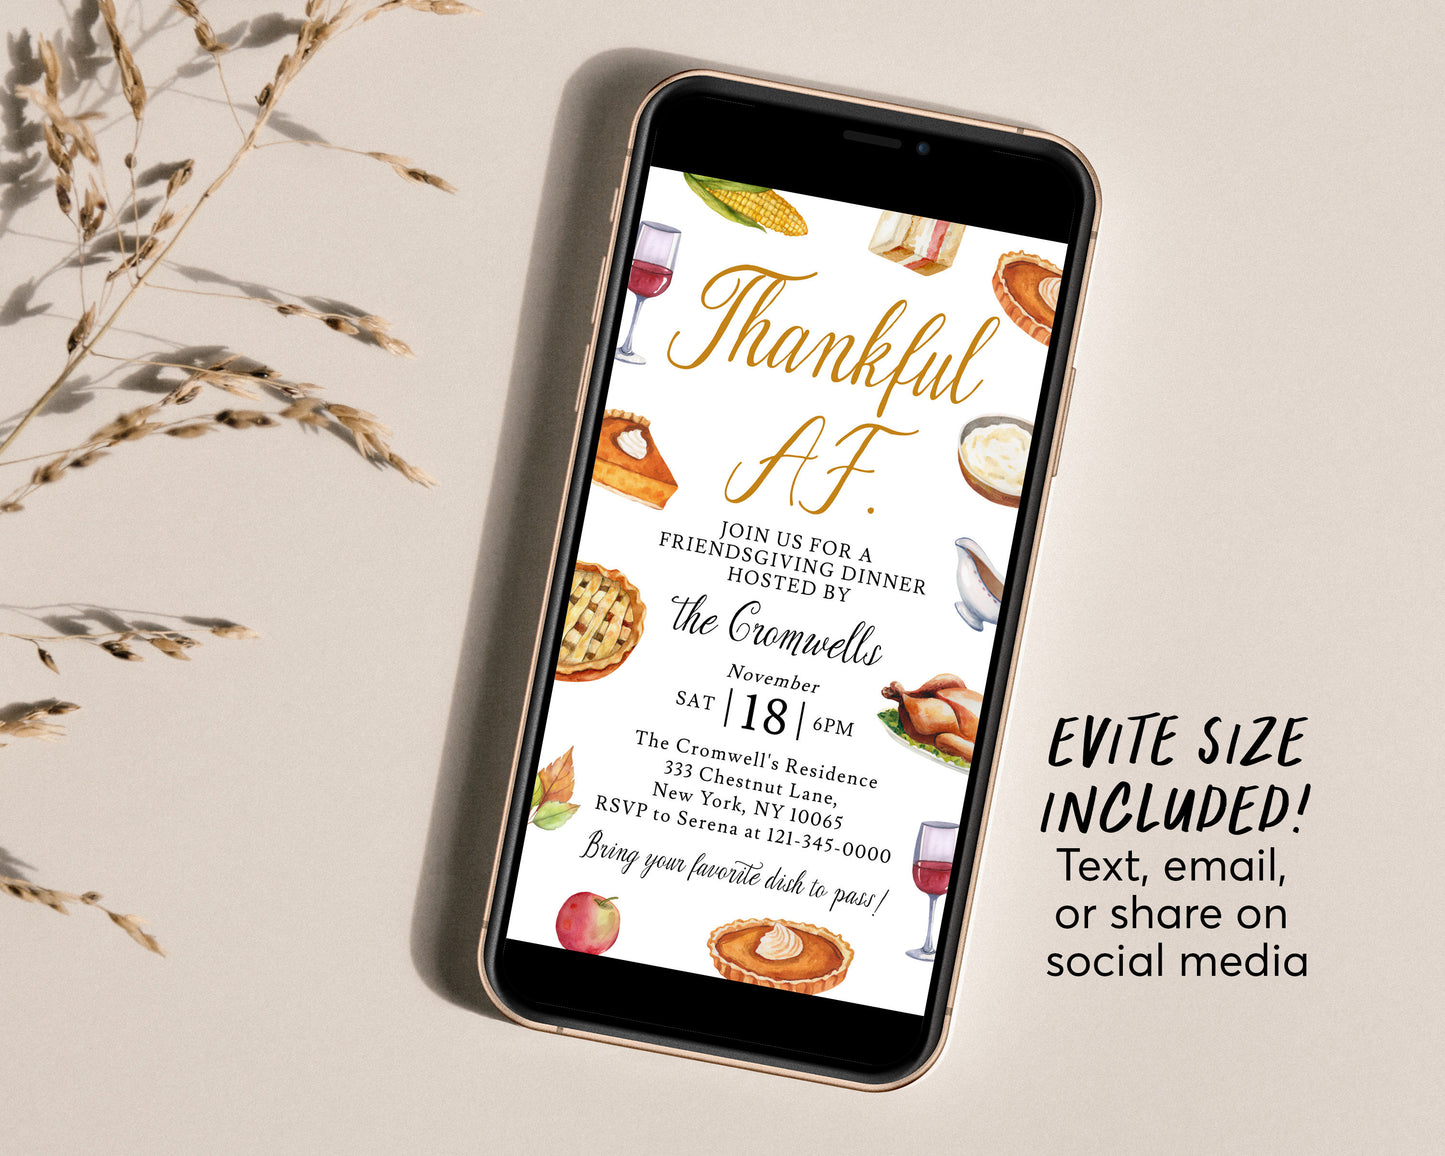 Friendsgiving Thankful AF Invitation Editable Template, Funny Thanksgiving Feast Potluck Dinner Party Invite, Fall Themed Holiday Turkey